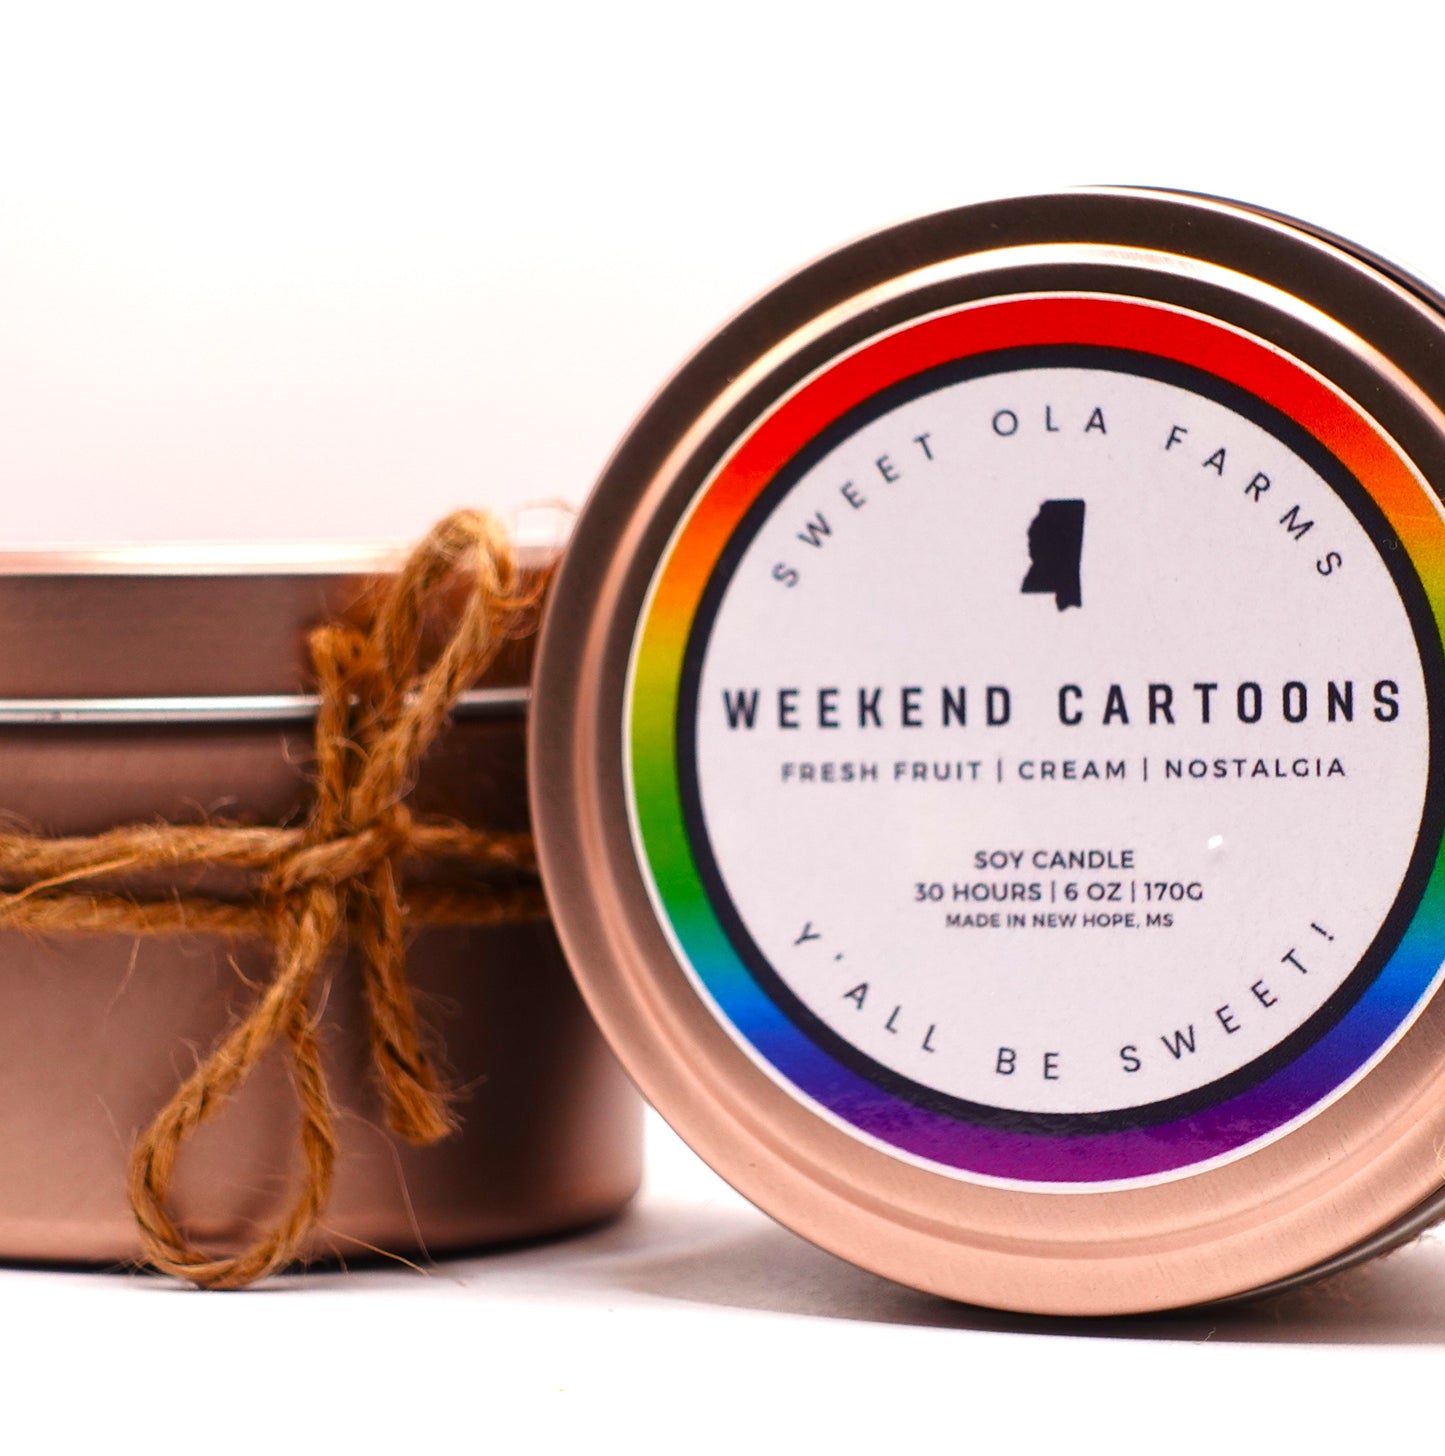 Weekend Cartoons - Hand Poured Soy Candle